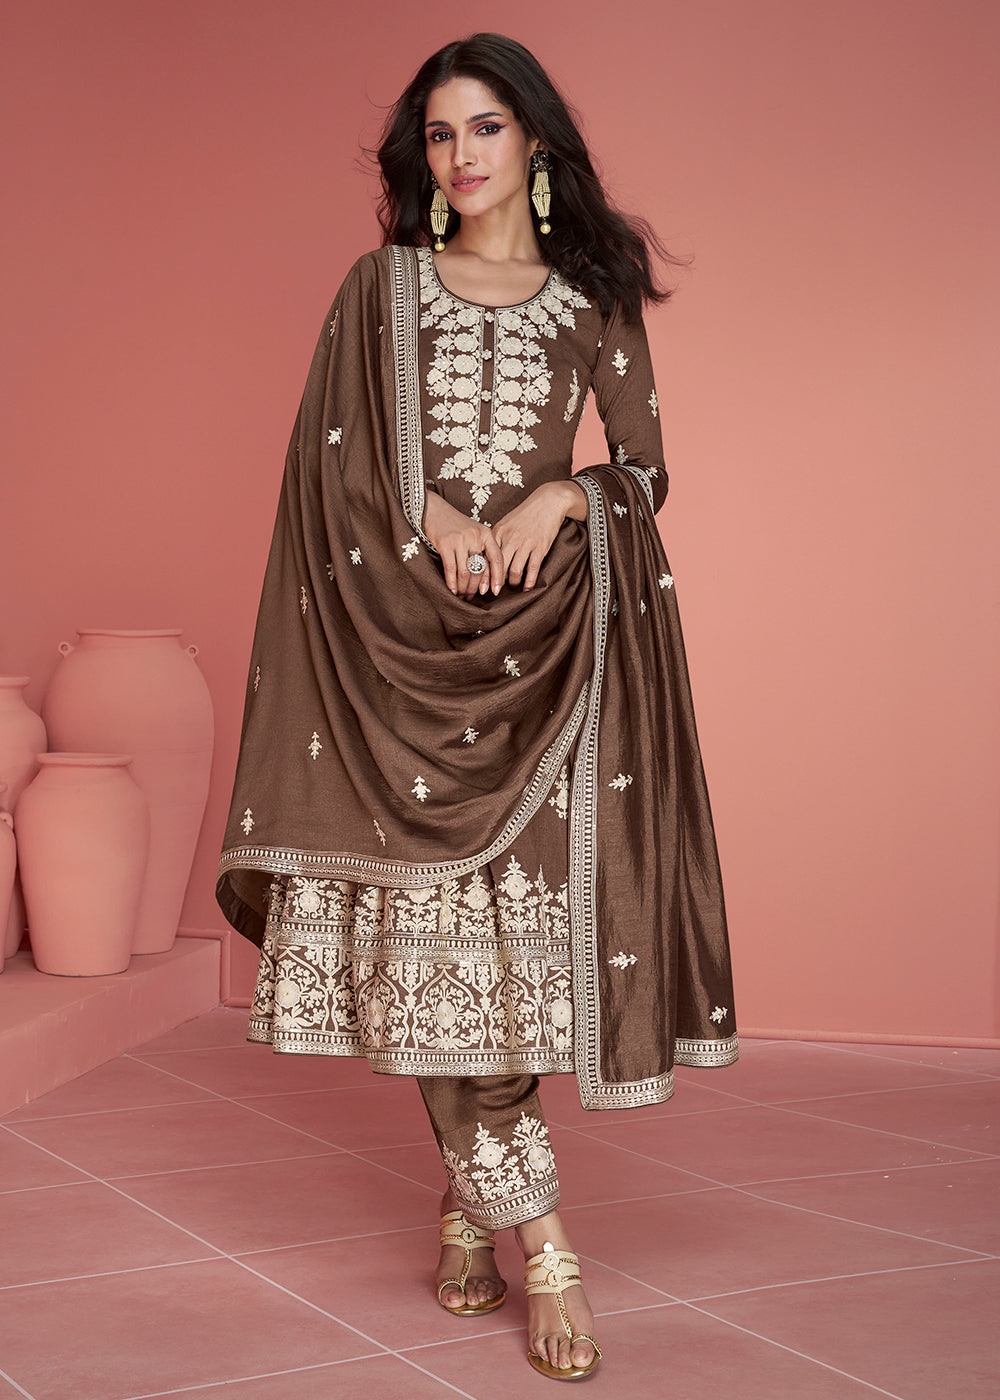 Buy Now Punjabi Style Silk Embroidered Salwar Suit in Brown Online in USA, UK, Canada, Germany, Australia & Worldwide at Empress Clothing.